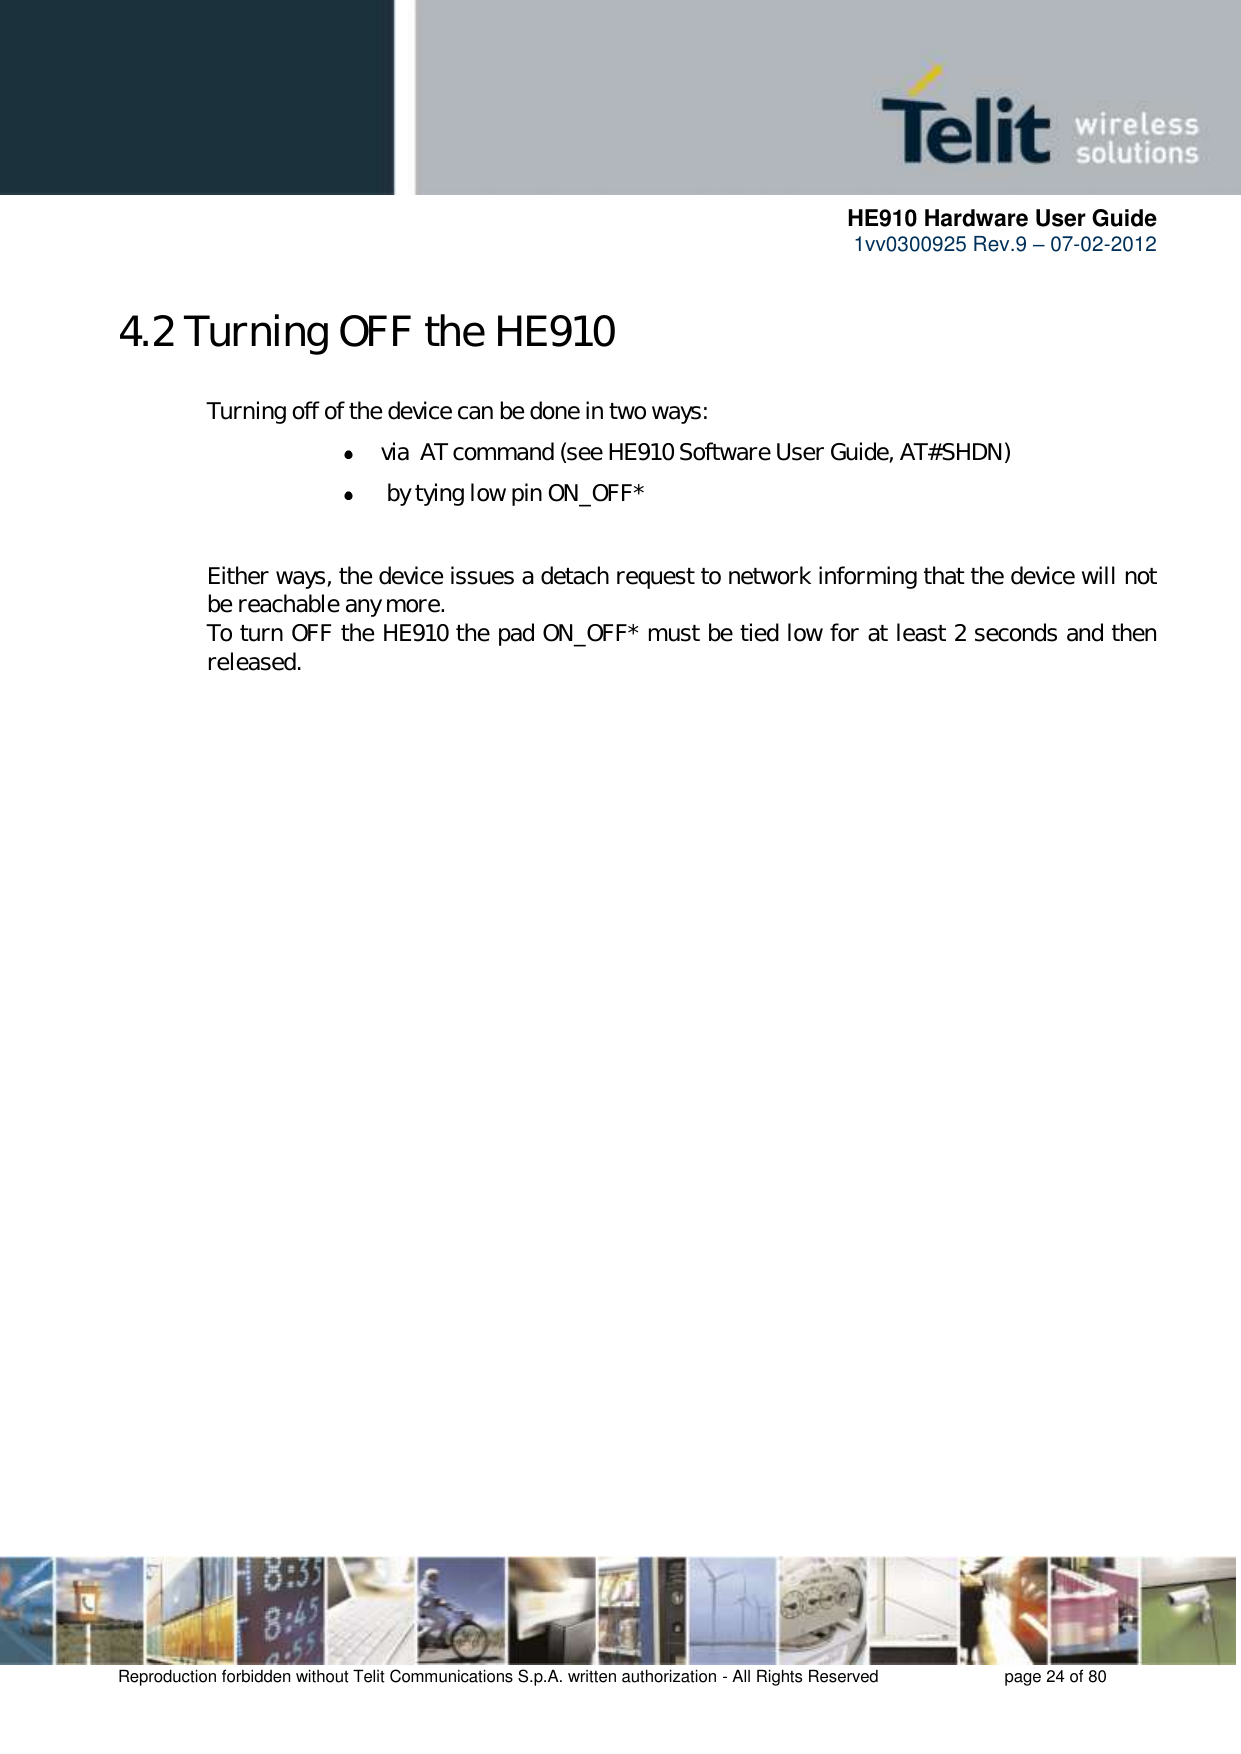      HE910 Hardware User Guide 1vv0300925 Rev.9 – 07-02-2012    Reproduction forbidden without Telit Communications S.p.A. written authorization - All Rights Reserved    page 24 of 80  4.2 Turning OFF the HE910   Turning off of the device can be done in two ways:  via  AT command (see HE910 Software User Guide, AT#SHDN)   by tying low pin ON_OFF*    Either ways, the device issues a detach request to network informing that the device will not   be reachable any more.    To turn OFF the HE910 the pad ON_OFF* must be tied low for at least 2 seconds and then   released.      